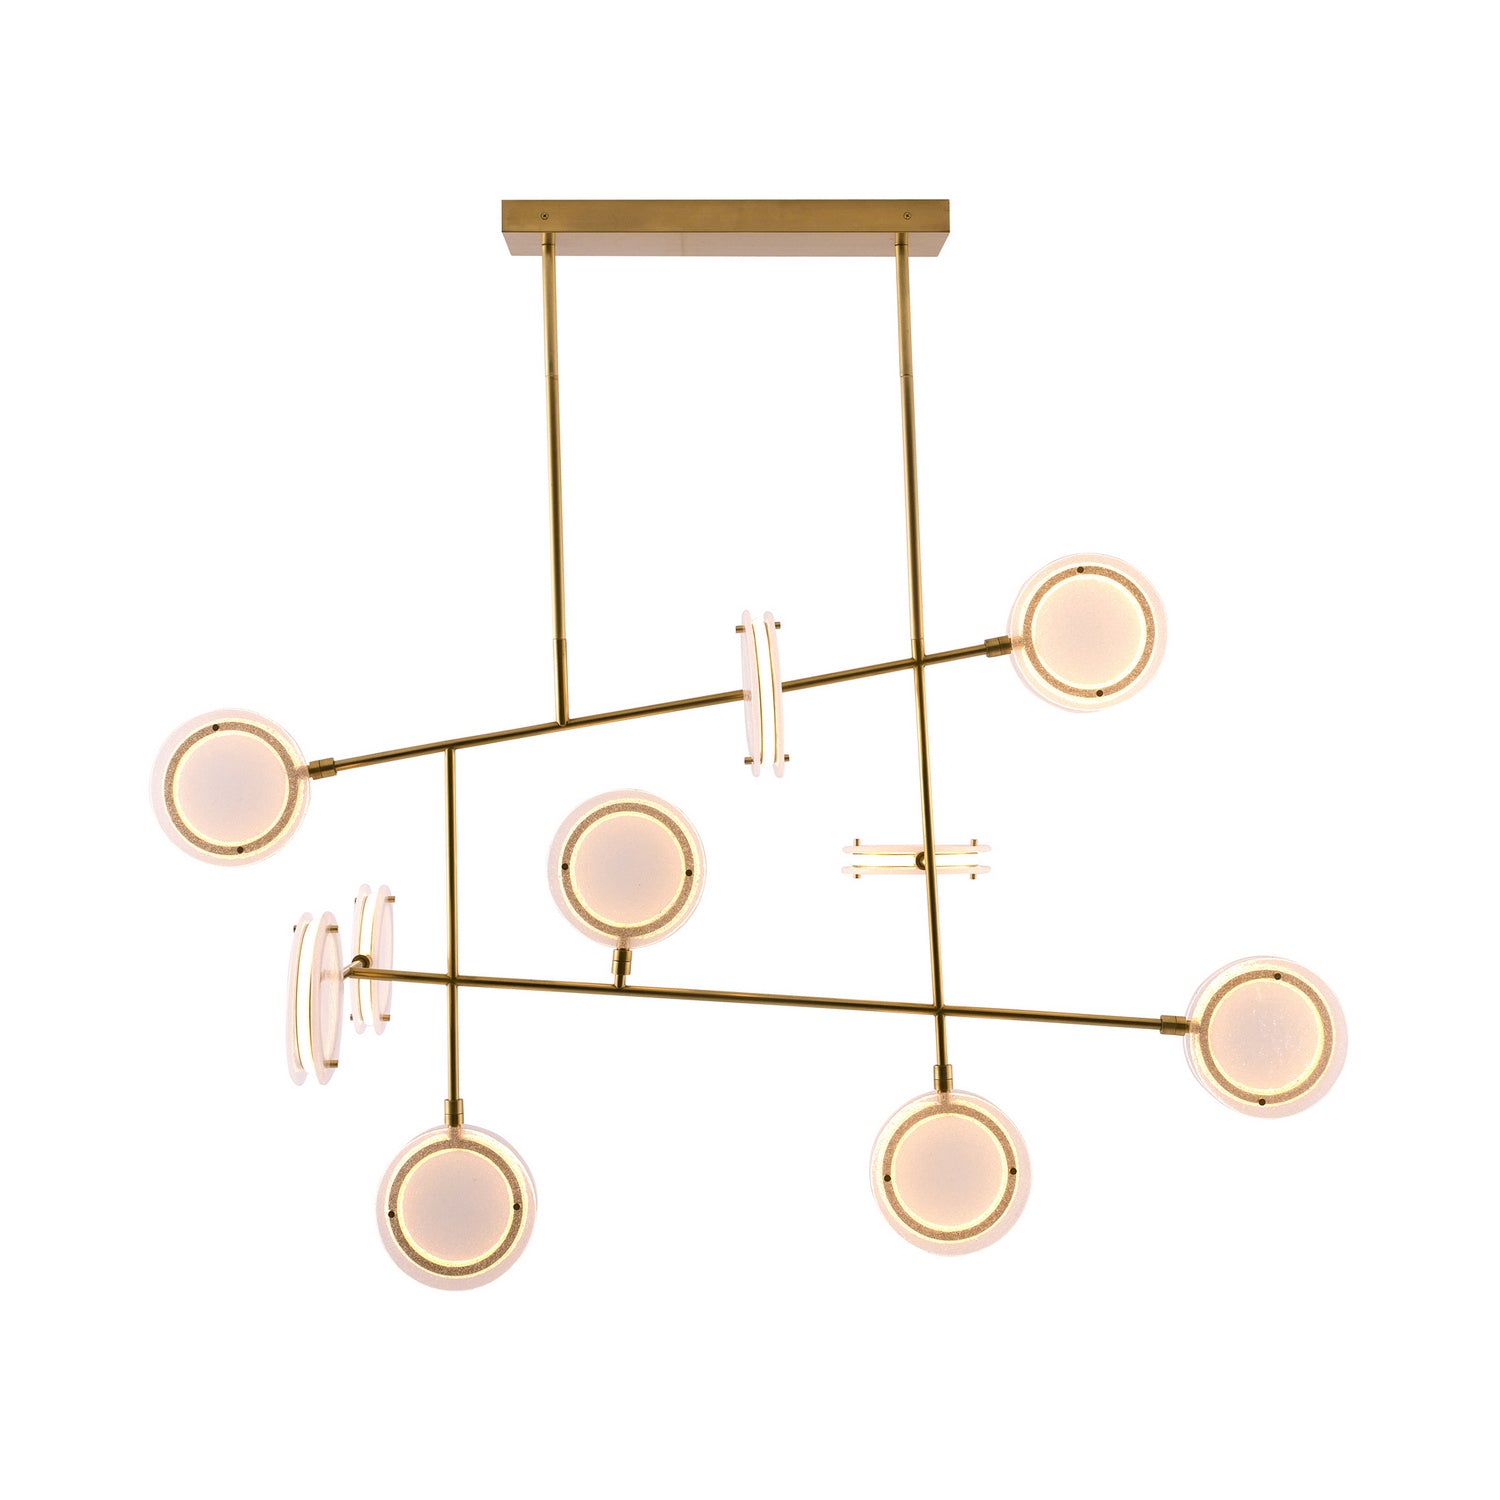 LED Pendant from the Meridian collection in Antique Brass finish